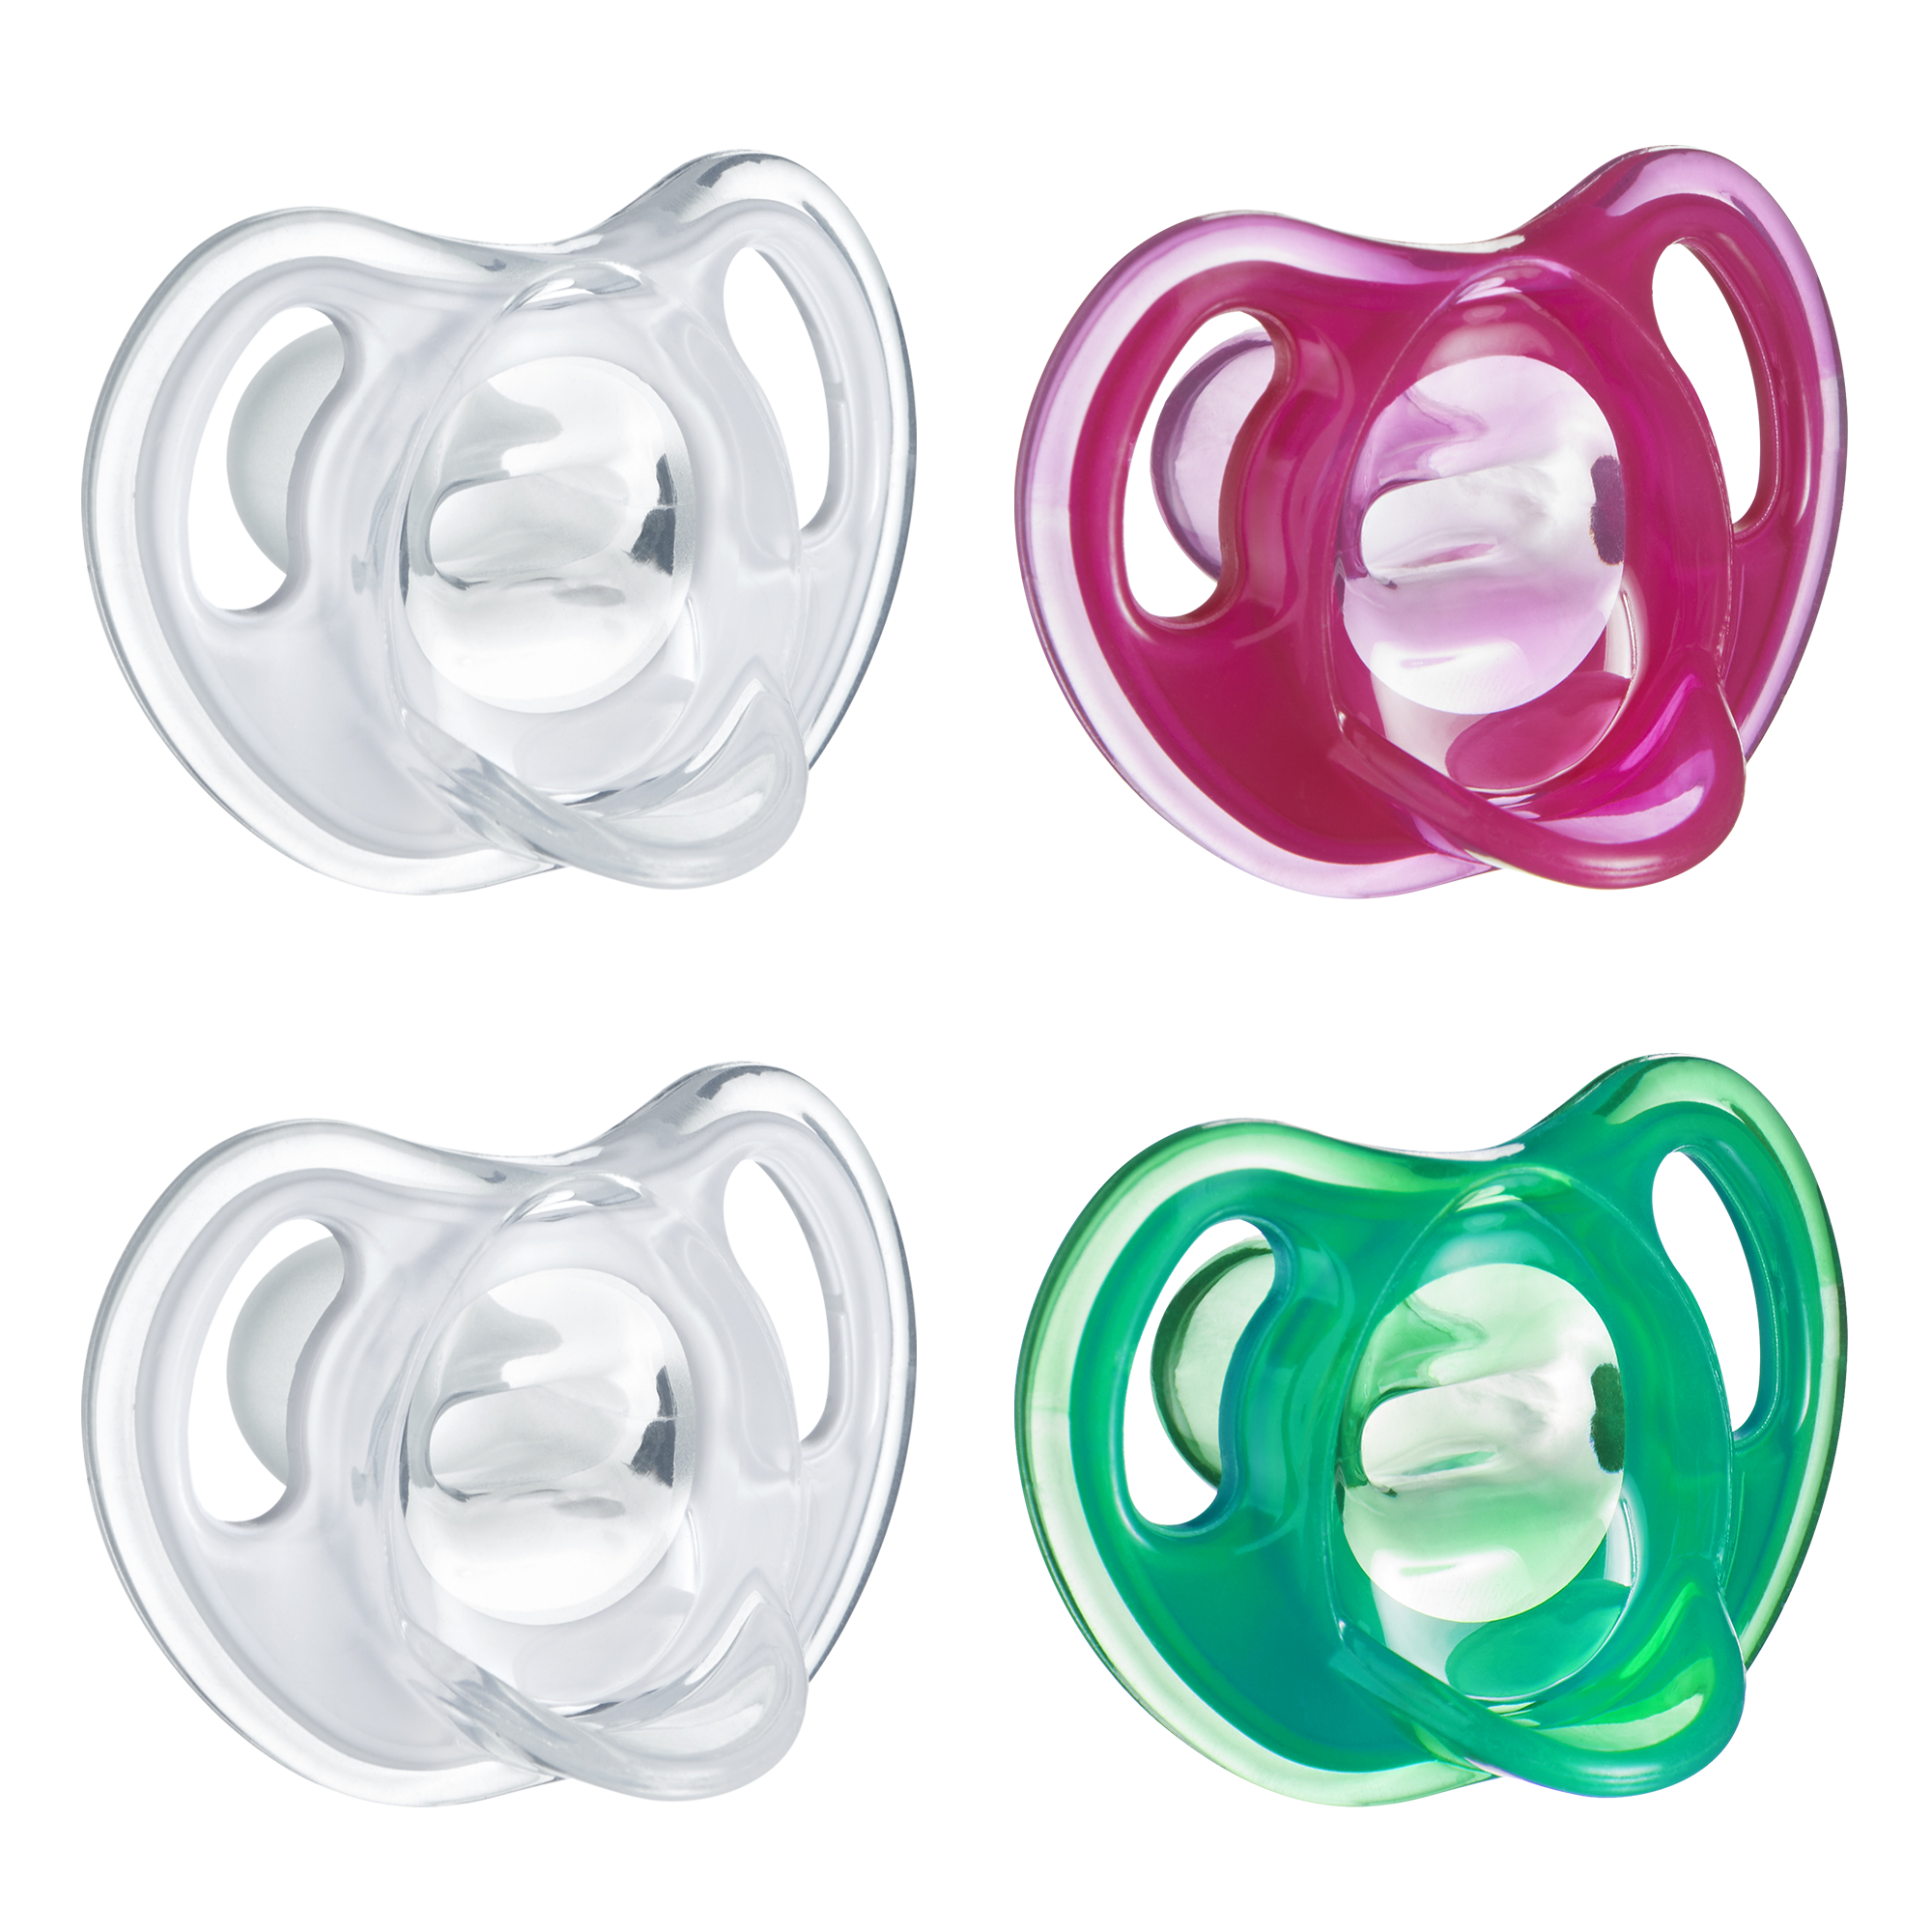 Tommee Tippee Ultra-Light Silicone Pacifier, Symmetrical One-Piece Design, BPA-Free Silicone Binkies, 18-36m, 4-Count - image 1 of 8